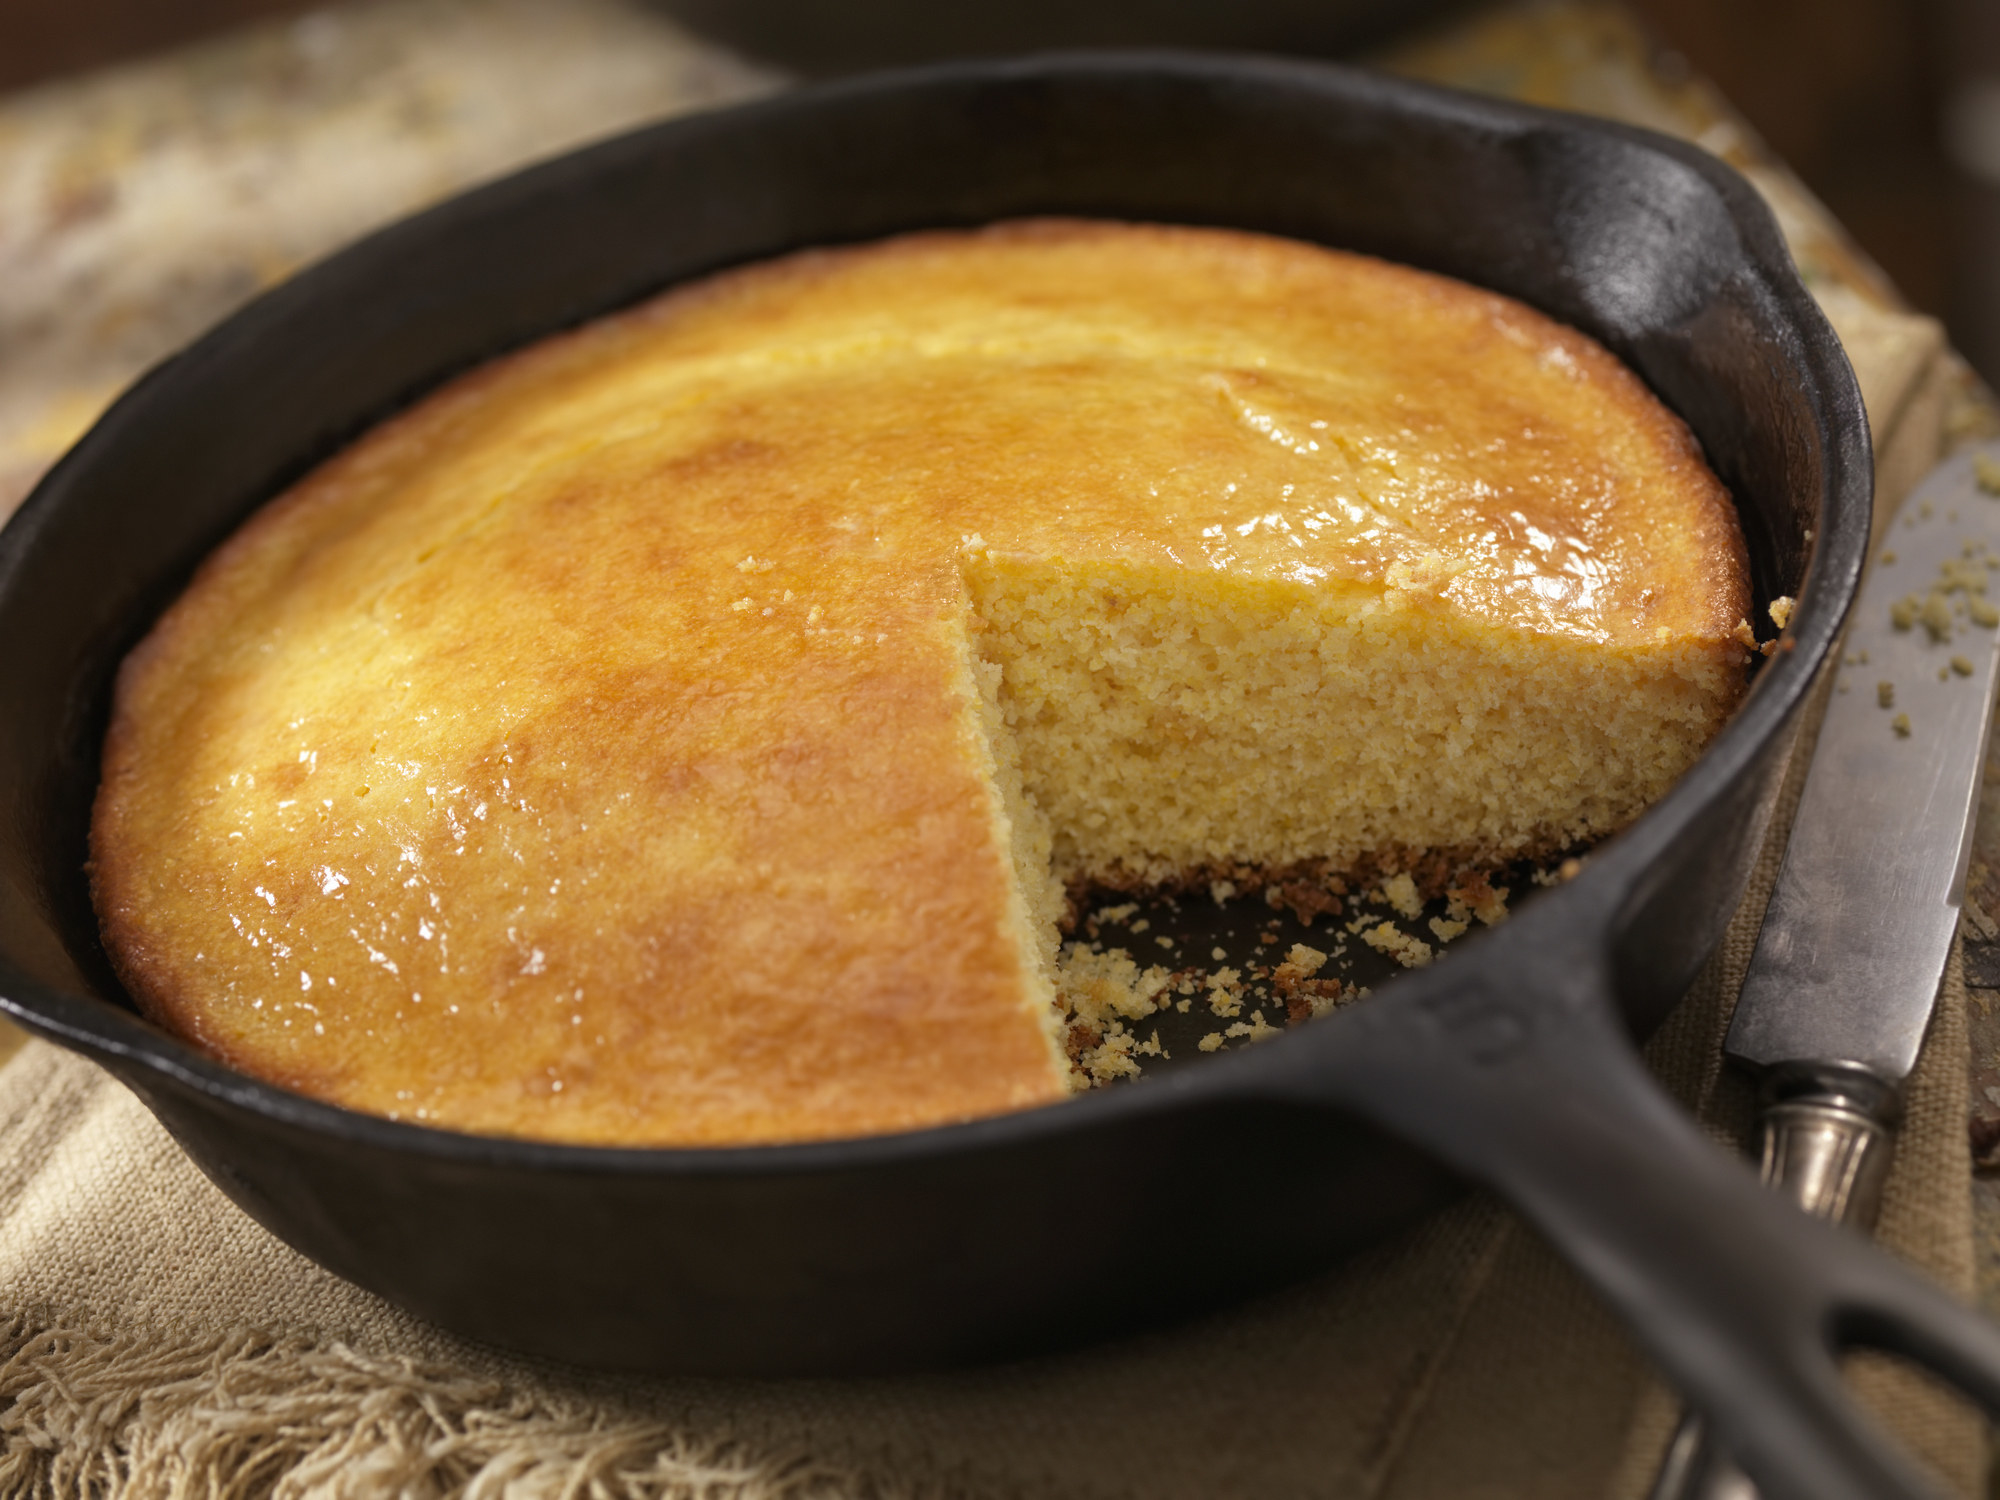 Cornbread in a cast iron pan with one slice taken out, knife by the pan